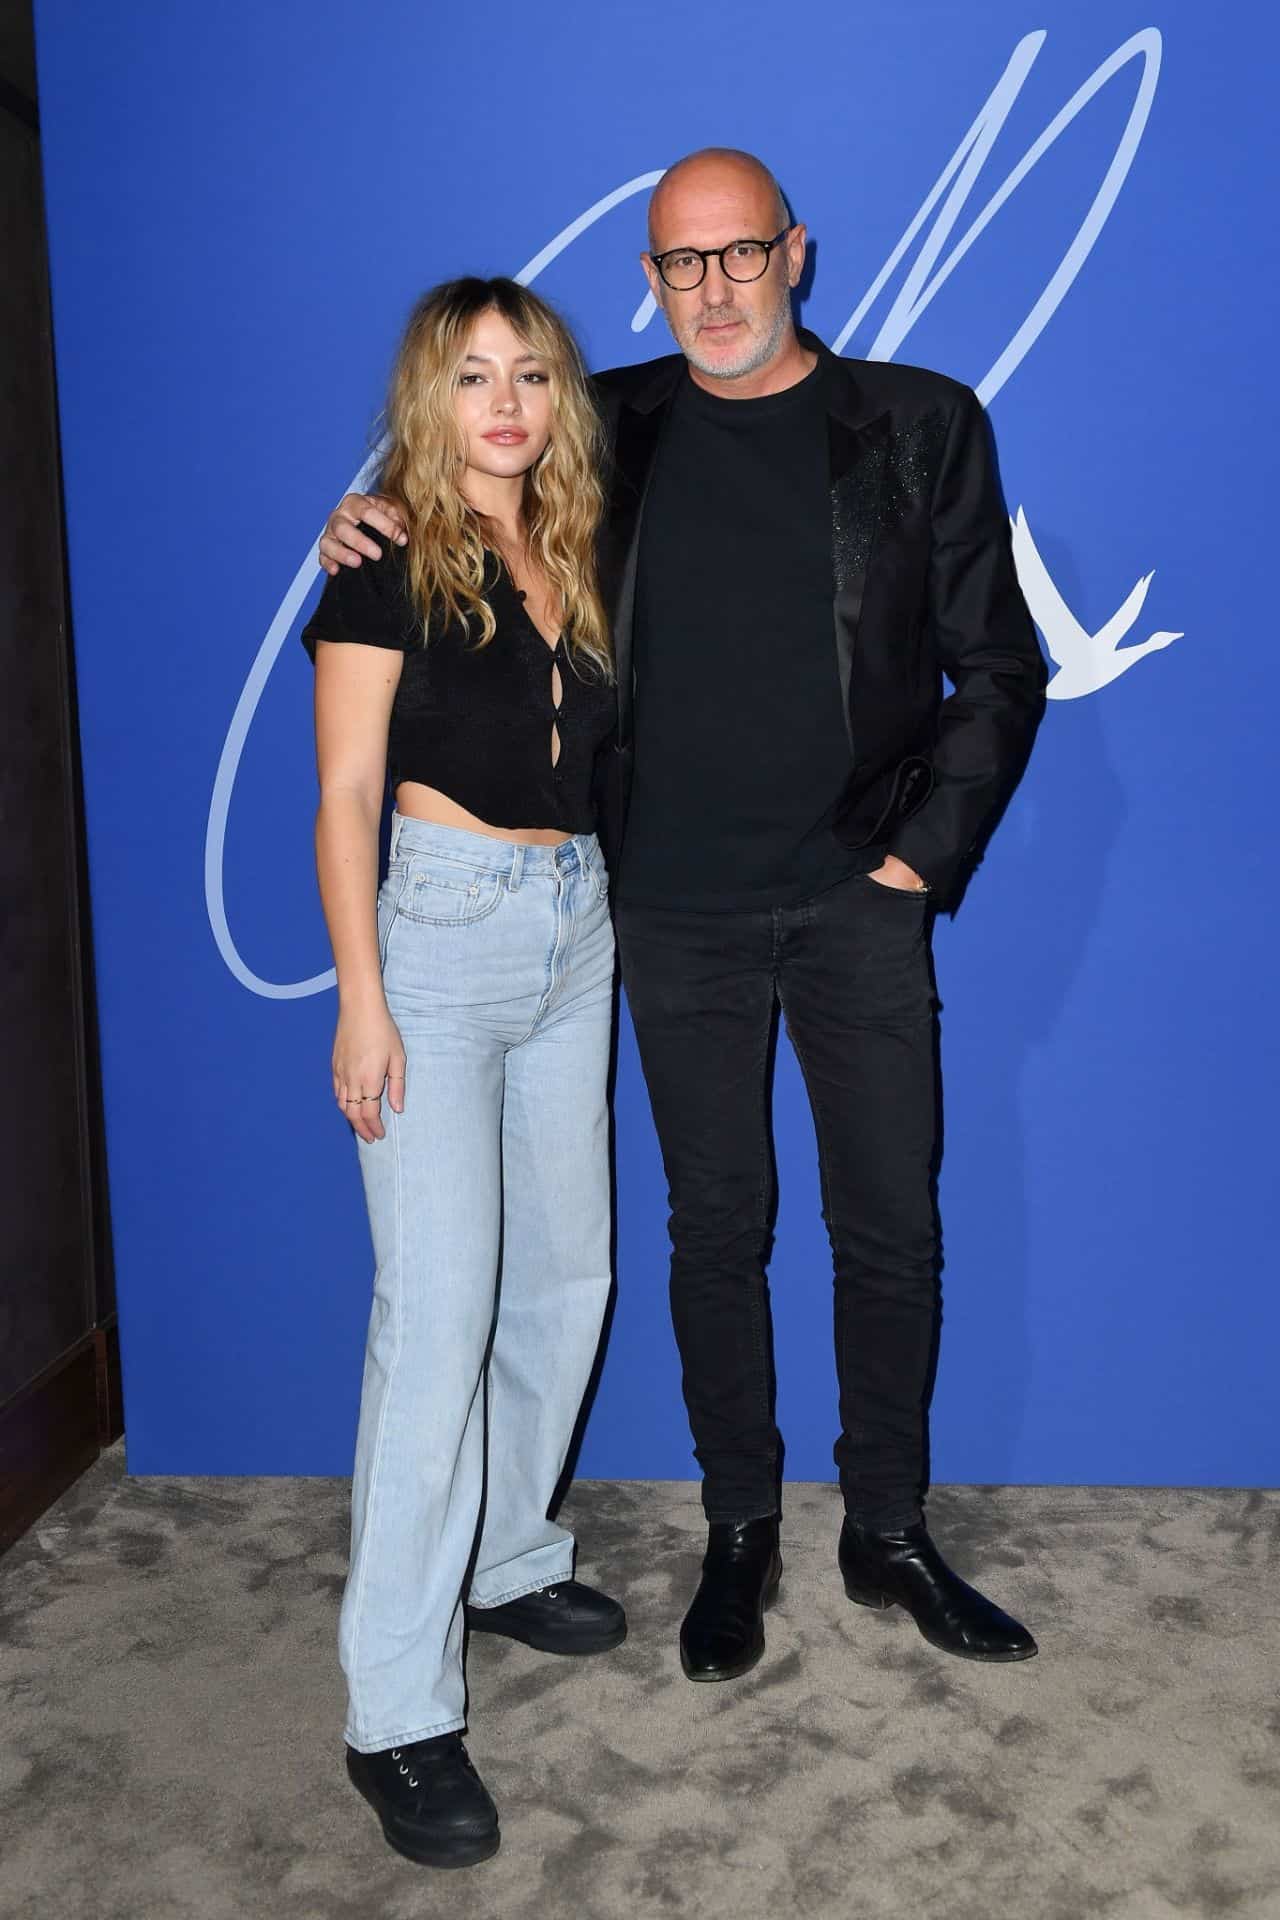 Madelyn Cline at “Grey Goose x CR Fashion Book” Party in Paris